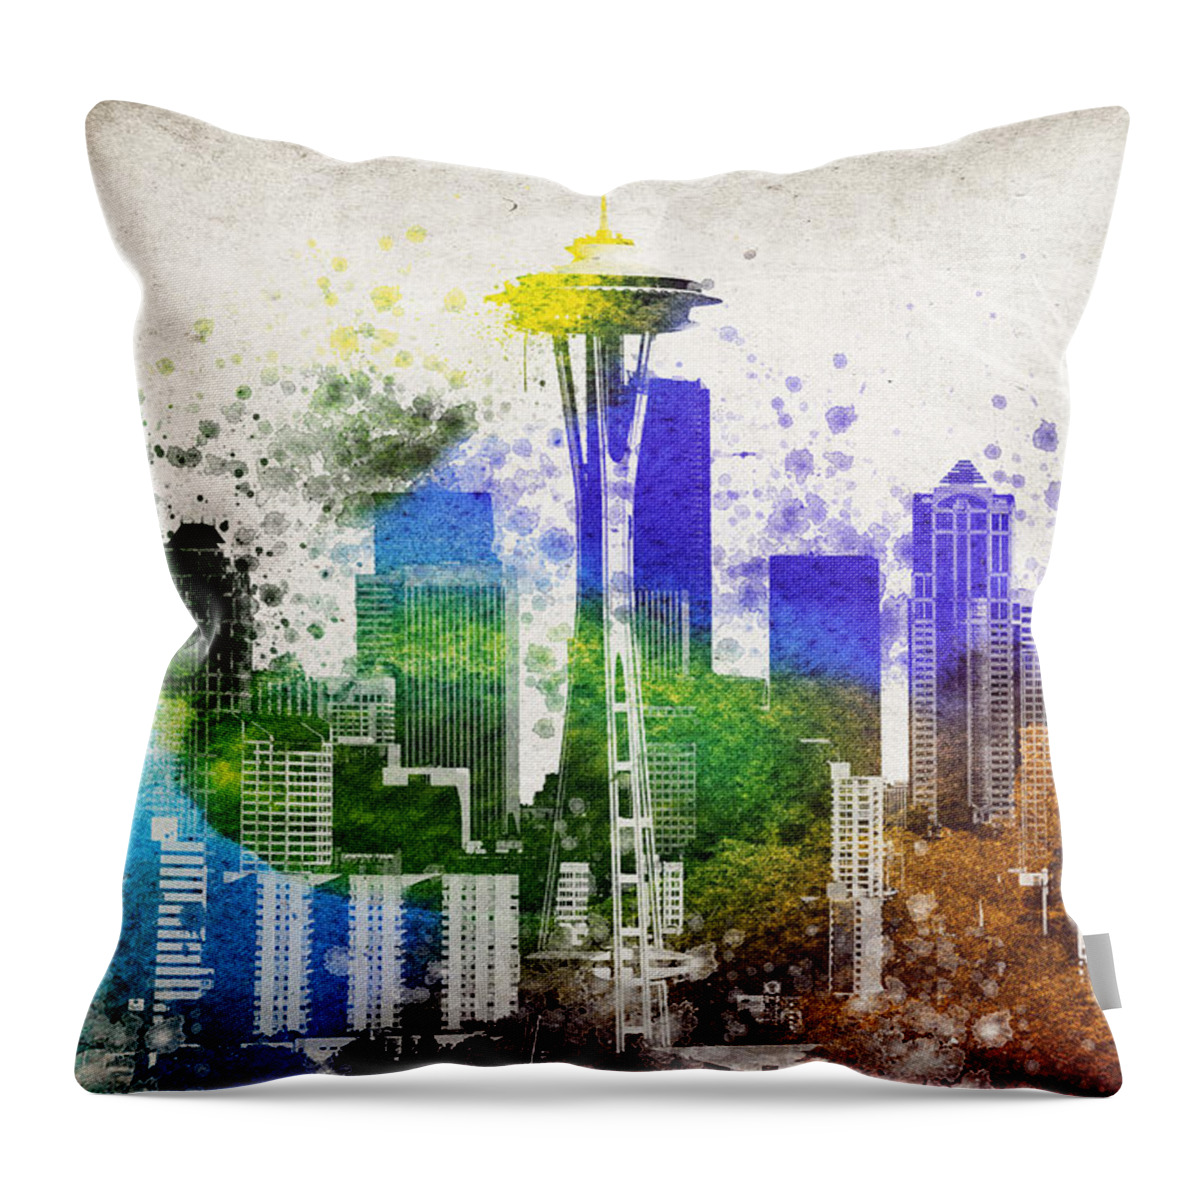 Seattle Downtown Throw Pillow featuring the digital art Seattle City Skyline by Aged Pixel